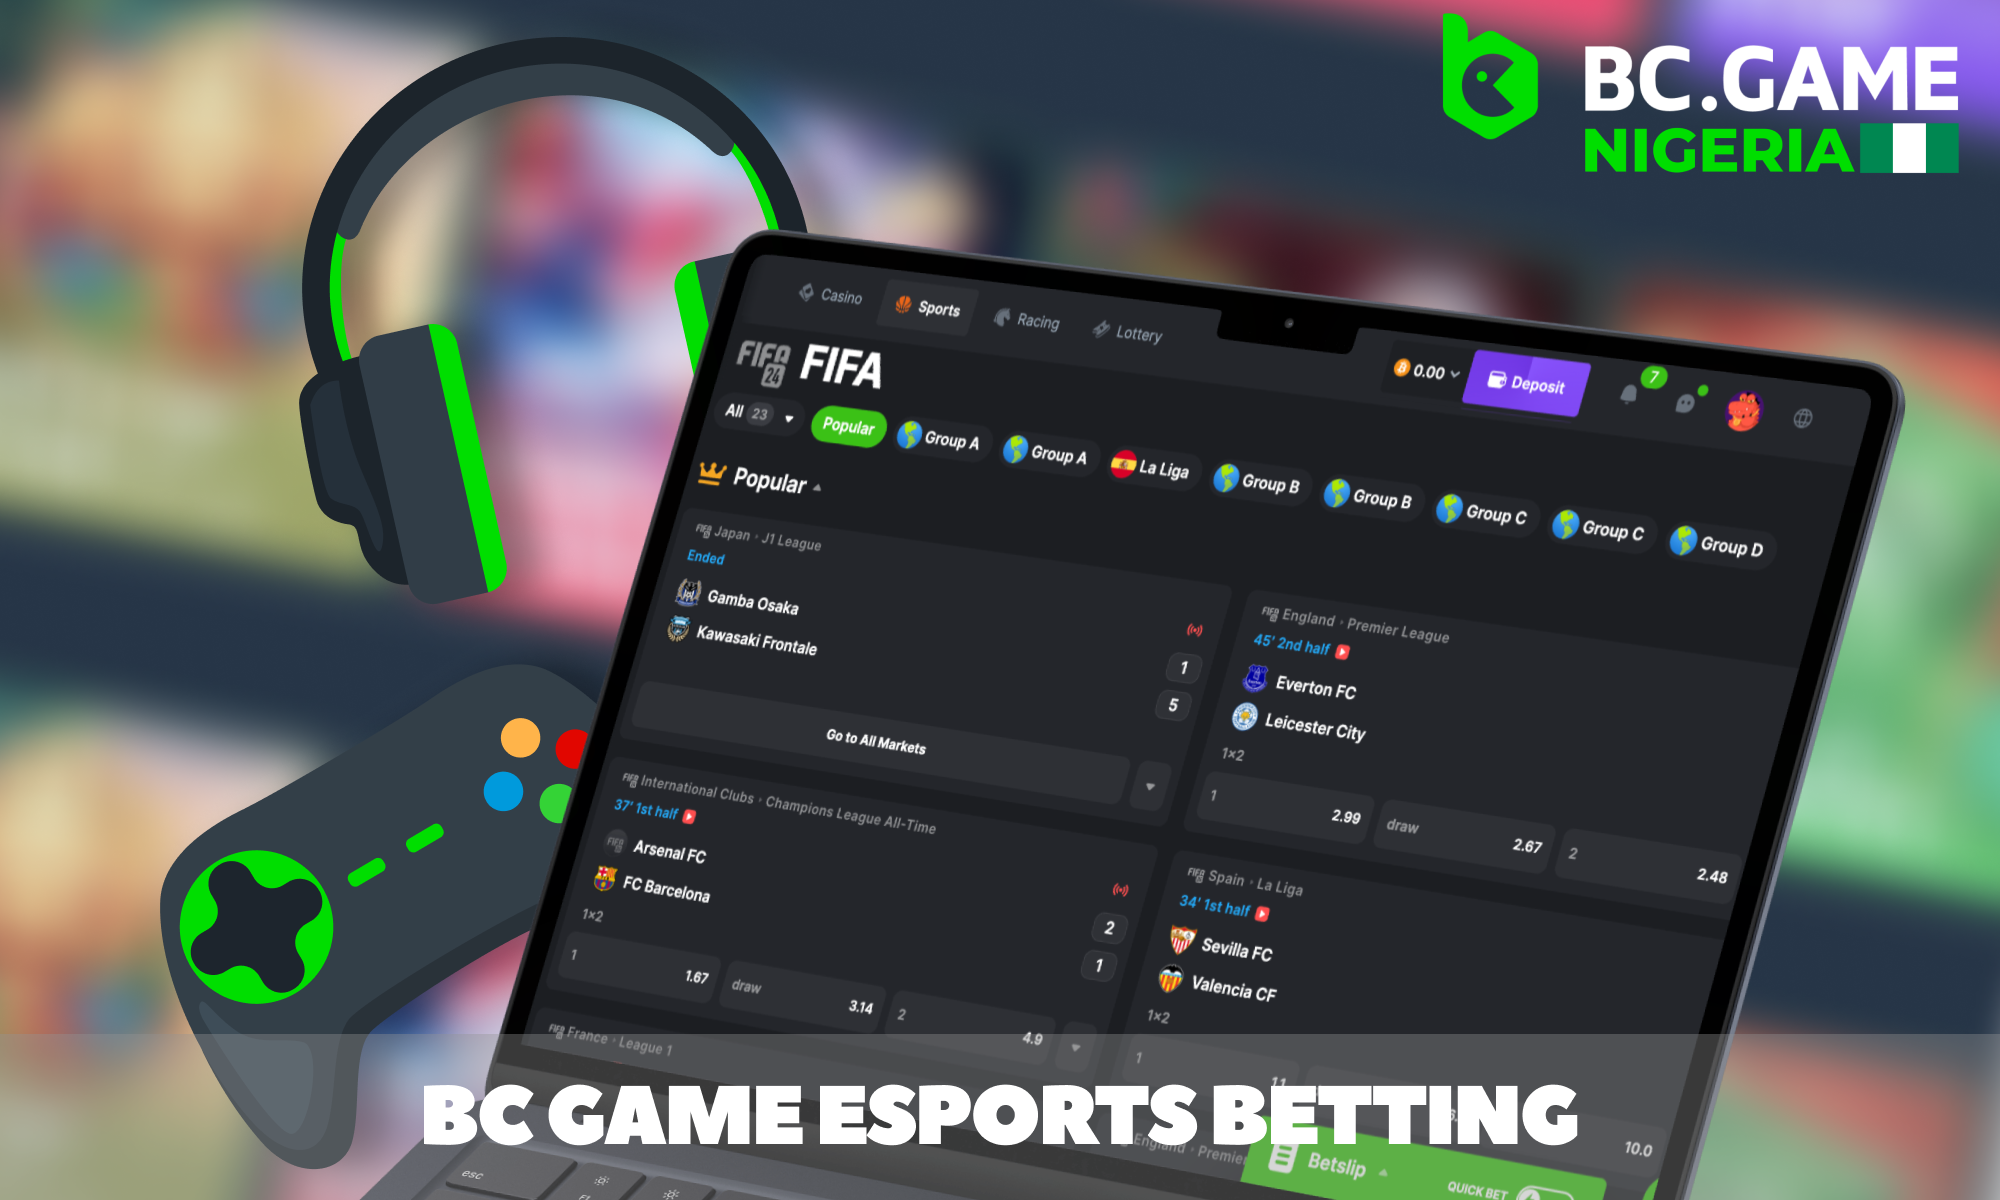 Esports betting for Nigerians at BC Game